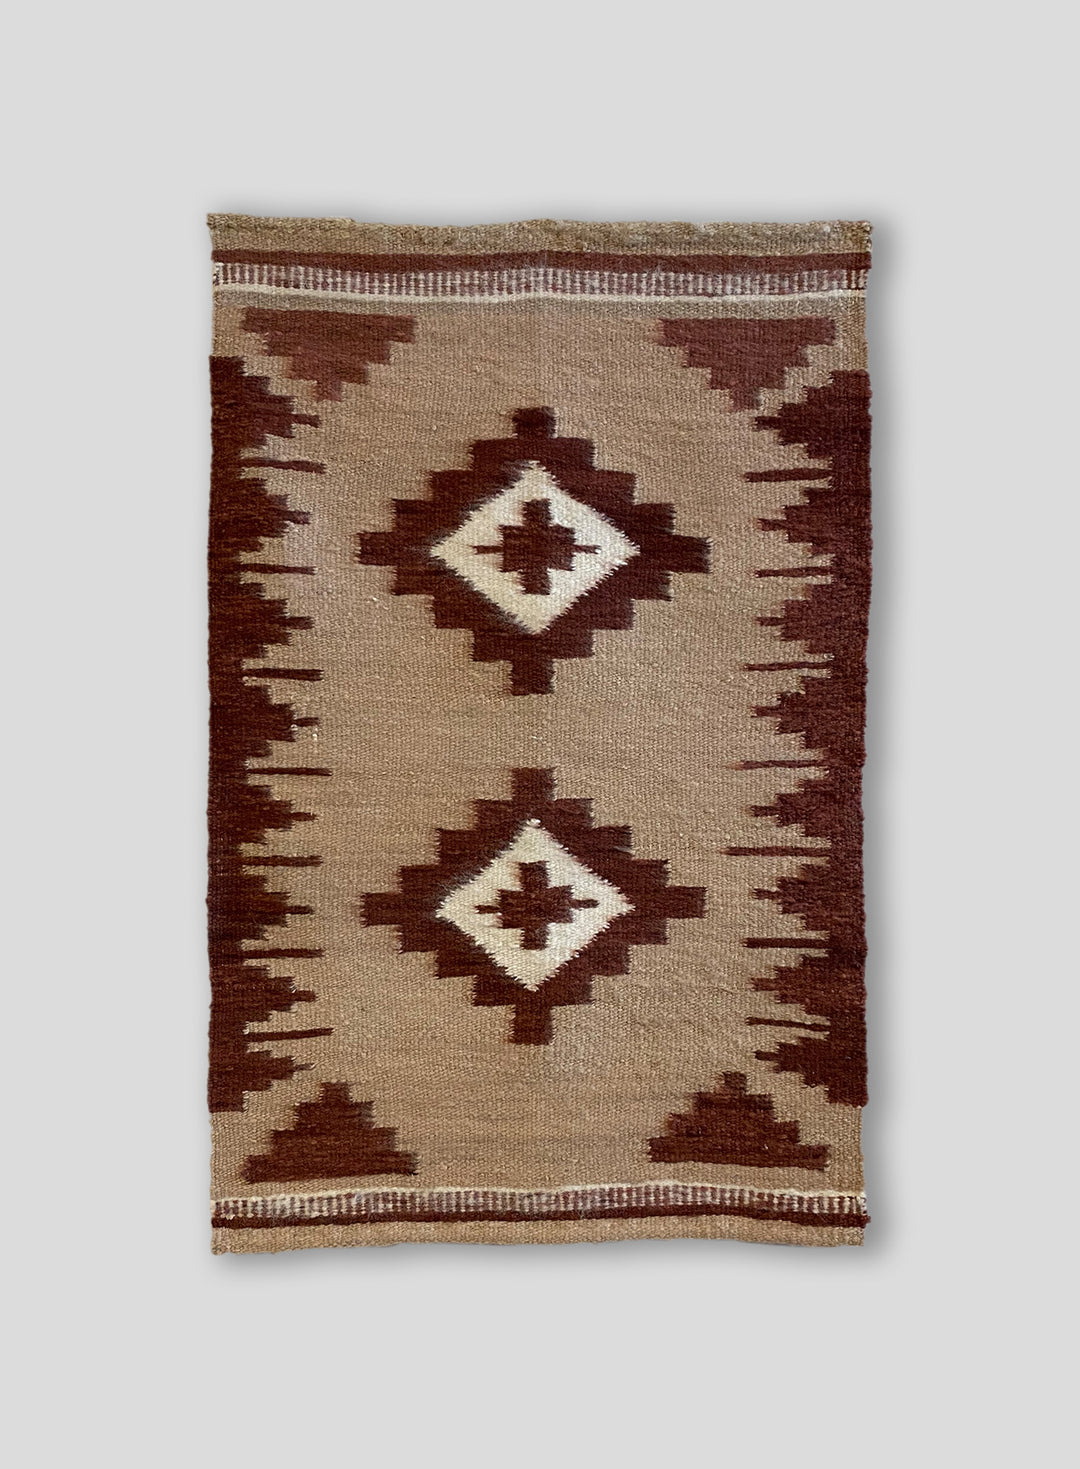 La Chacana Tapestry in Fawn